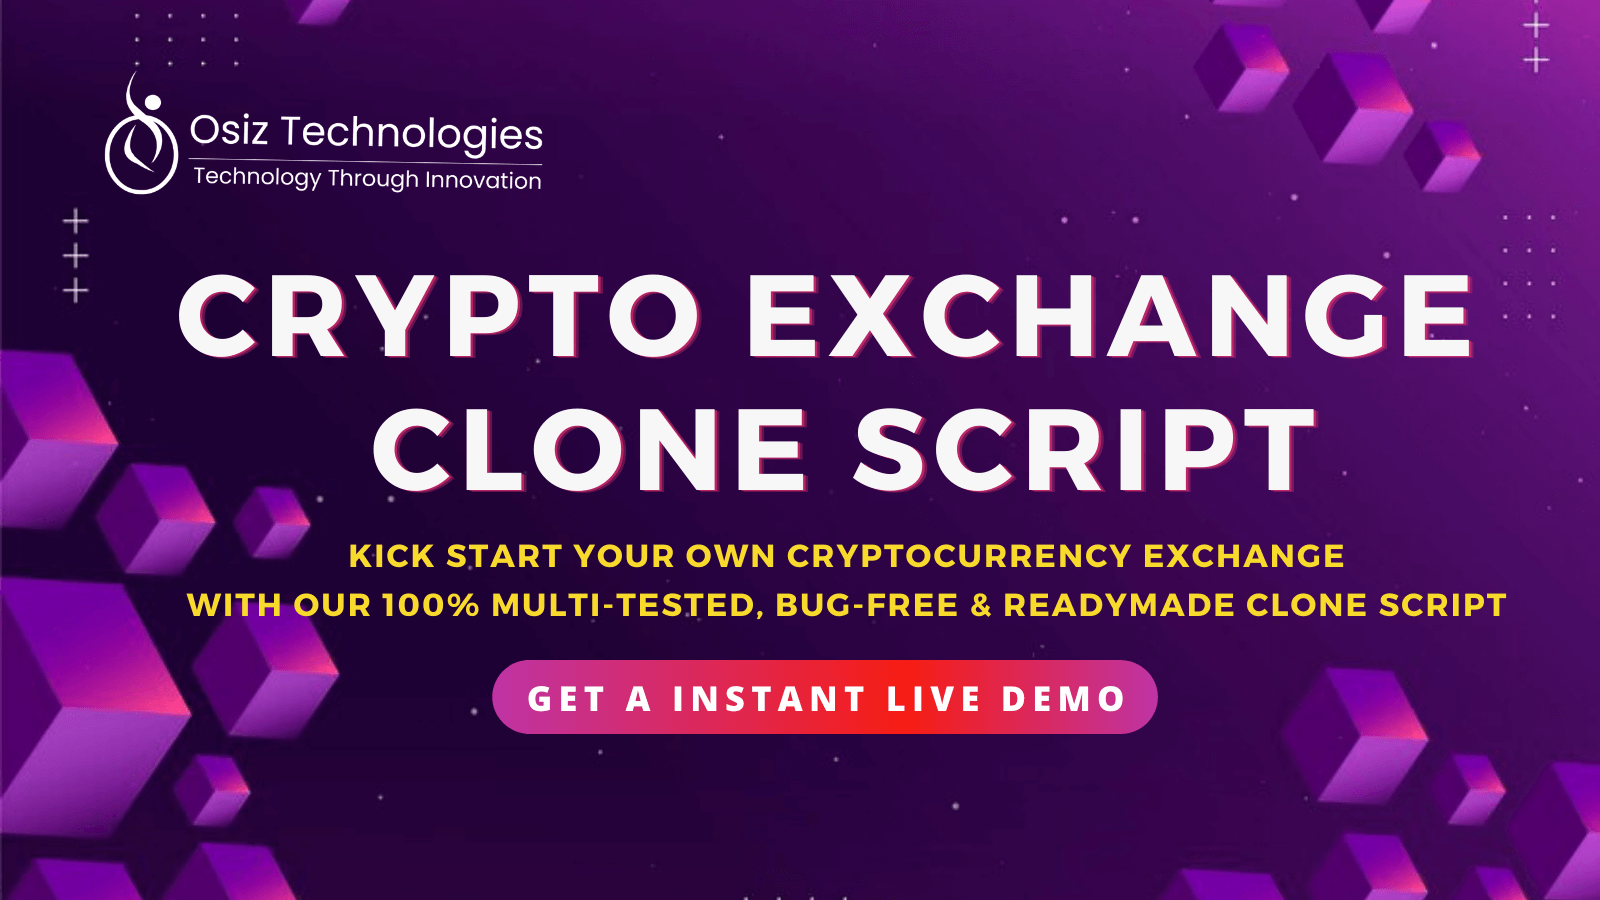 Cryptocurrency Exchange Clone Scripts - Choose the Crypto Exchange Clone That You Want to Launch!